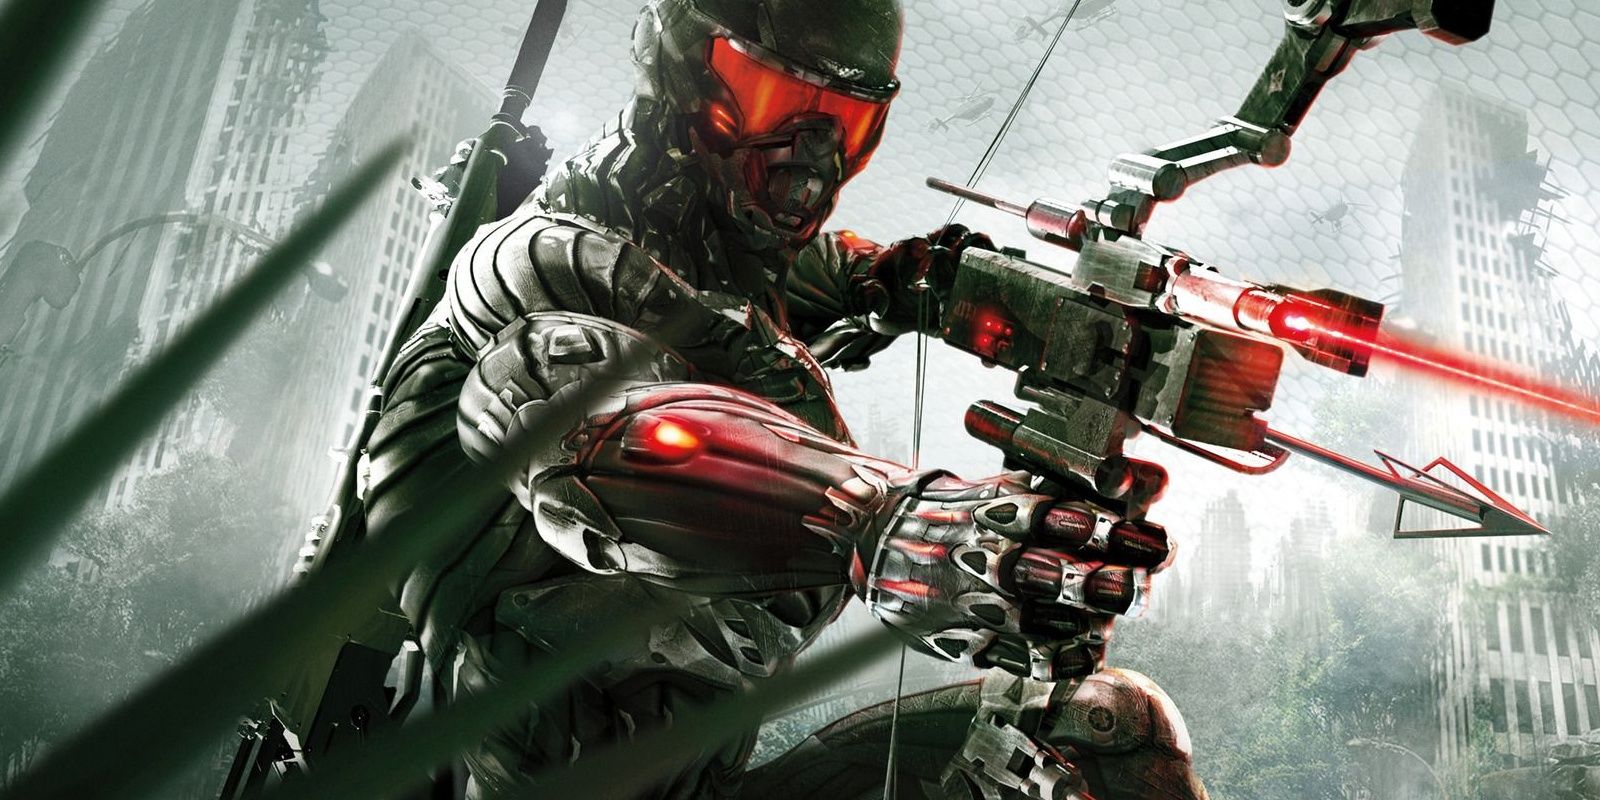 Key Art of Crysis 3 featuring the lead character Prophet.